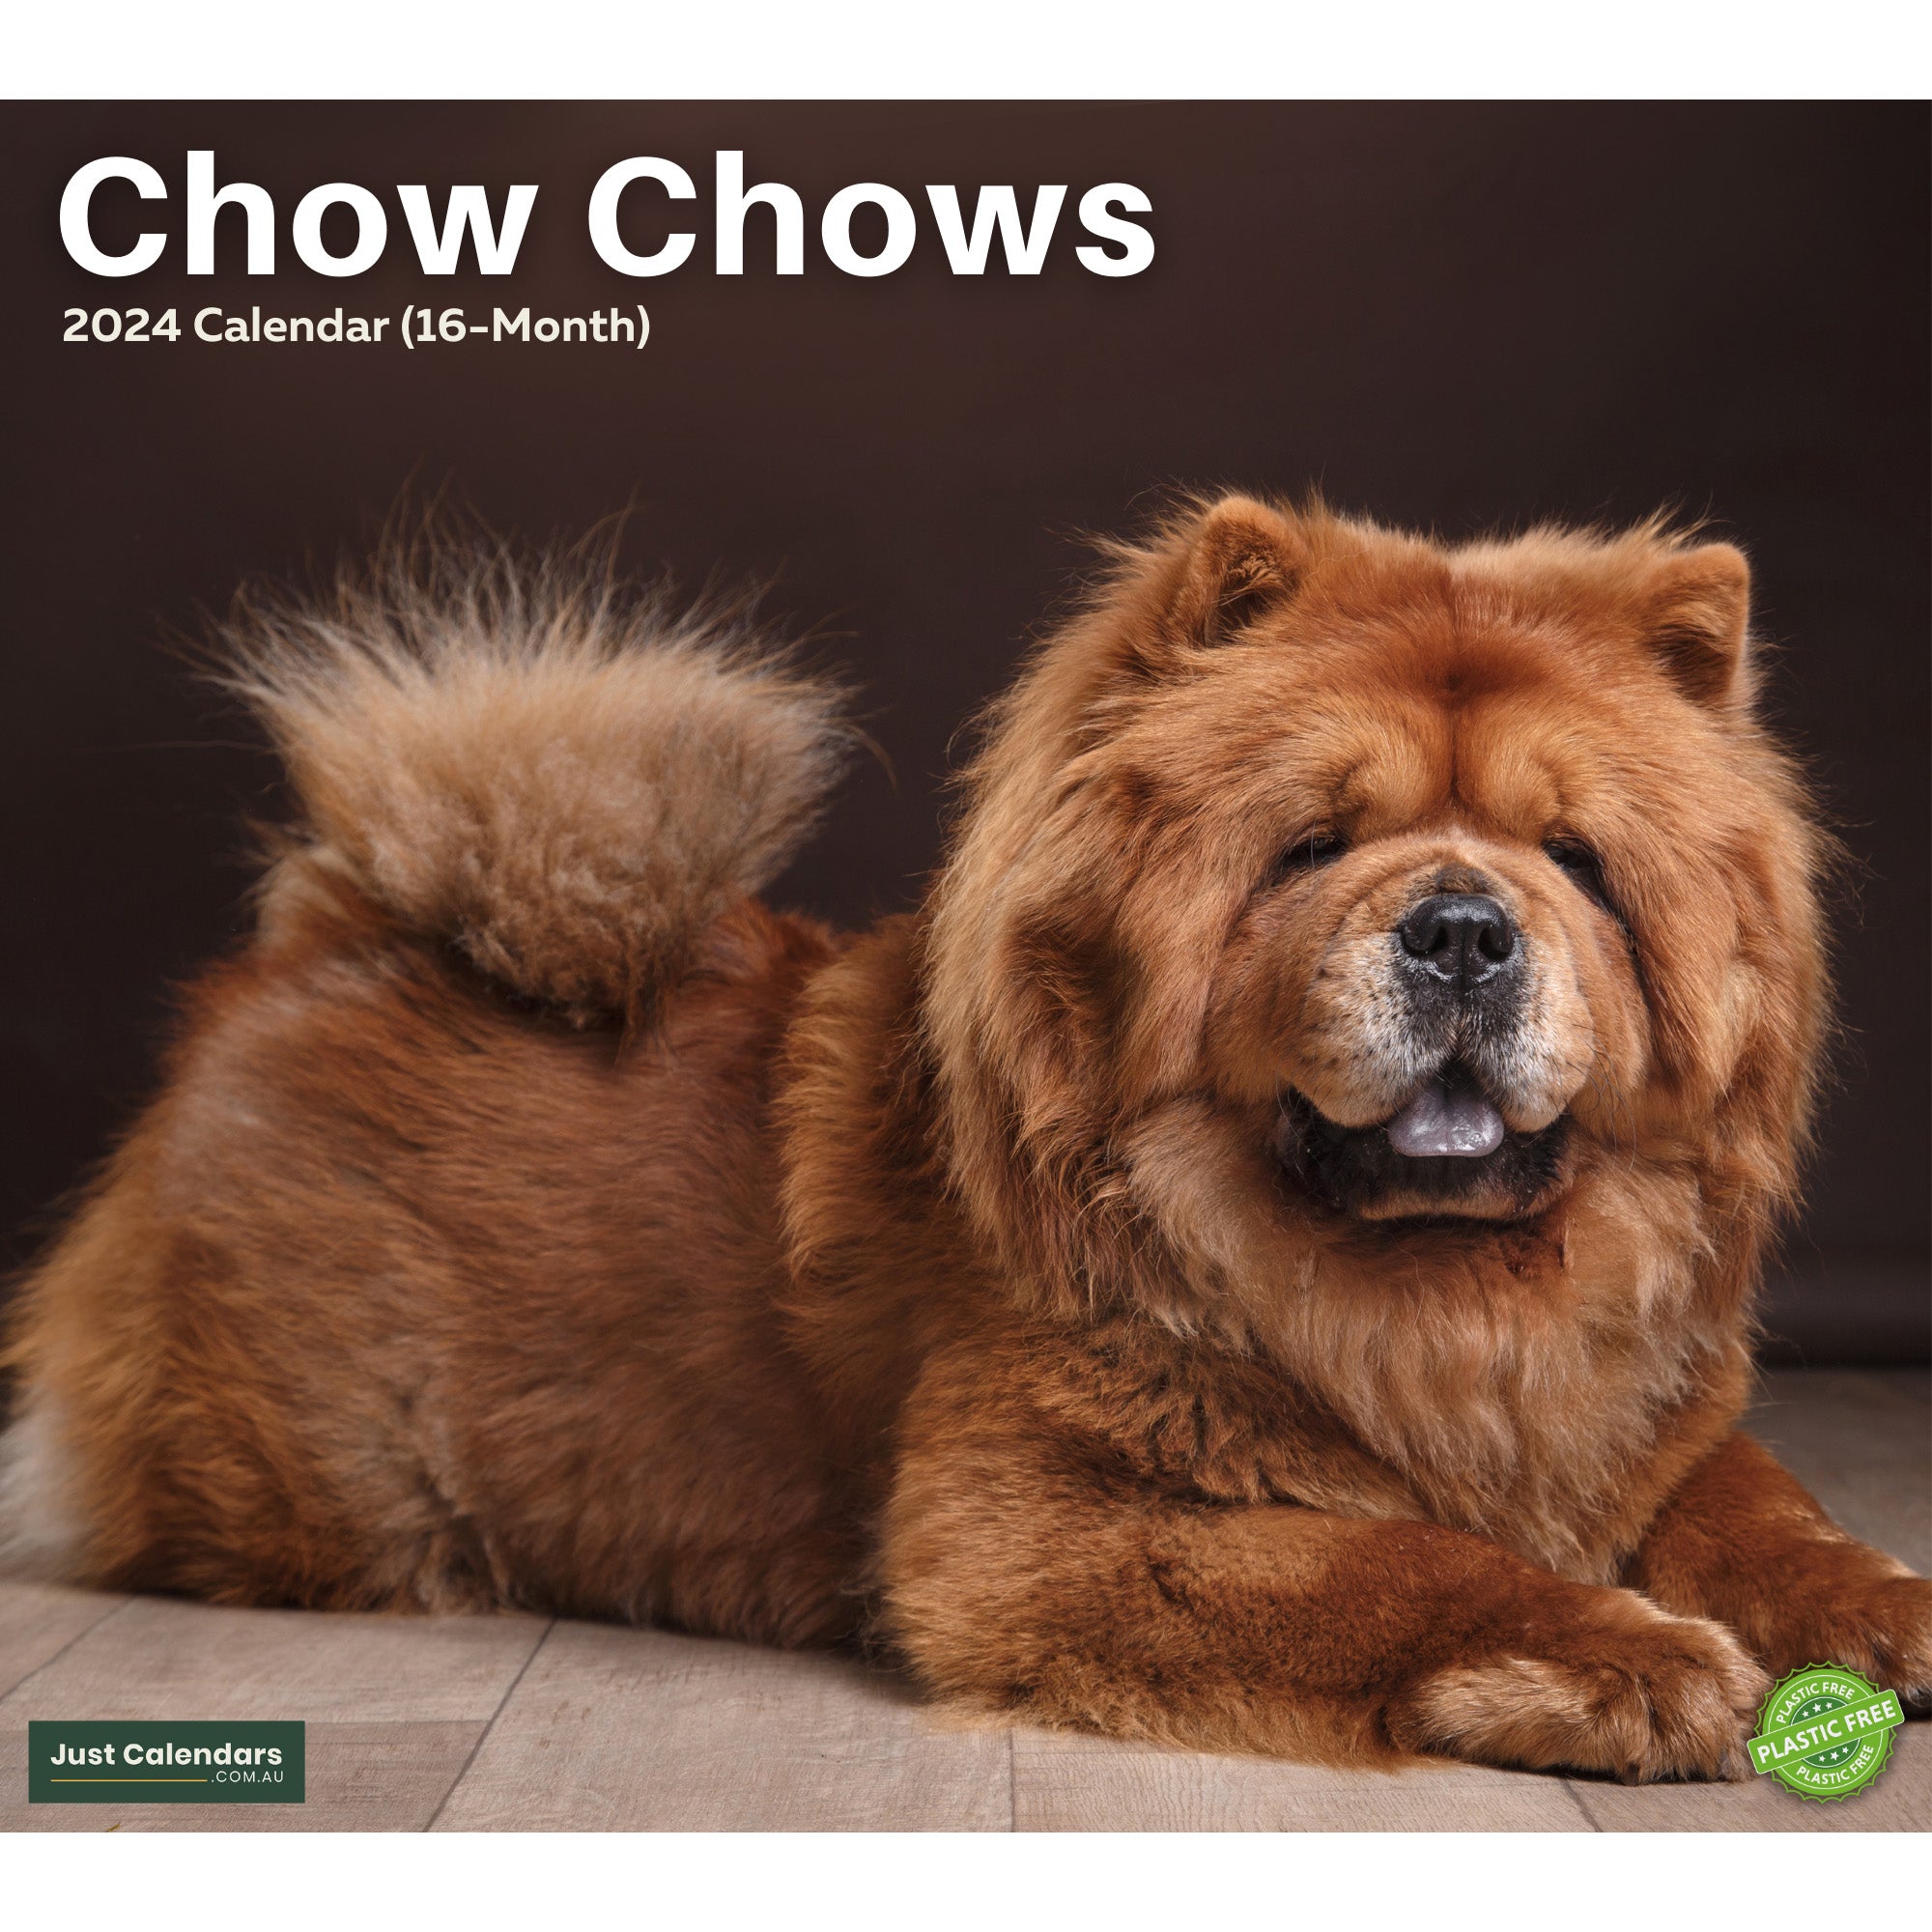 2024 Chow Chows Dogs & Puppies - Deluxe Wall Calendar by Just Calendars - 16 Month - Plastic Free